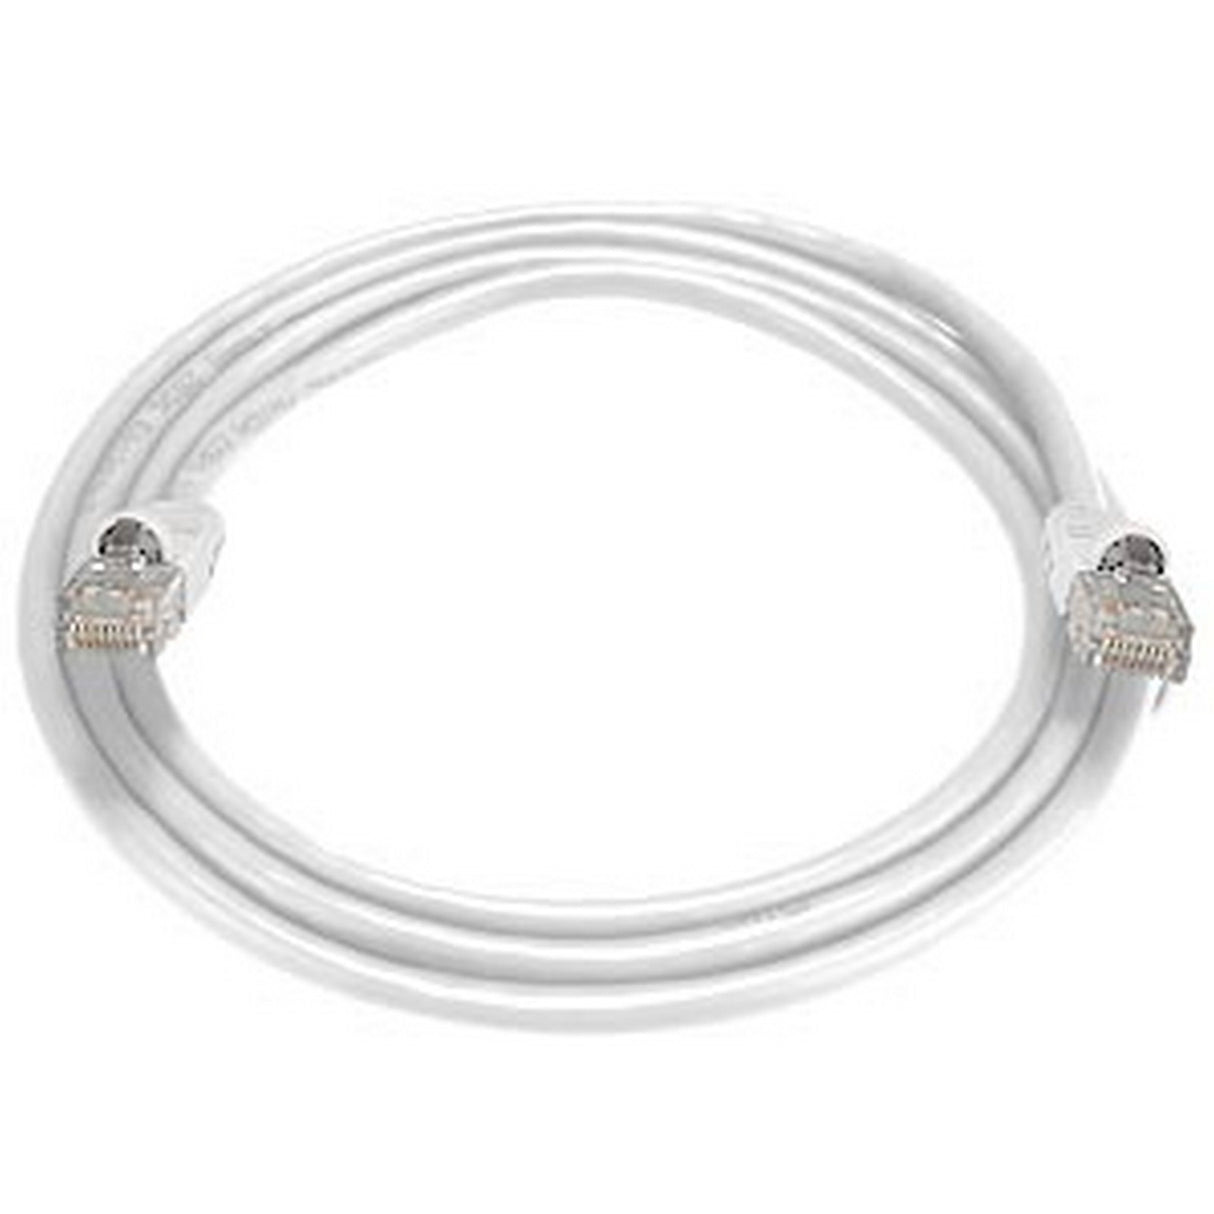 NTI CAT5-10-WHITE CAT5 Cable, Male to Male, White, 10-Foot